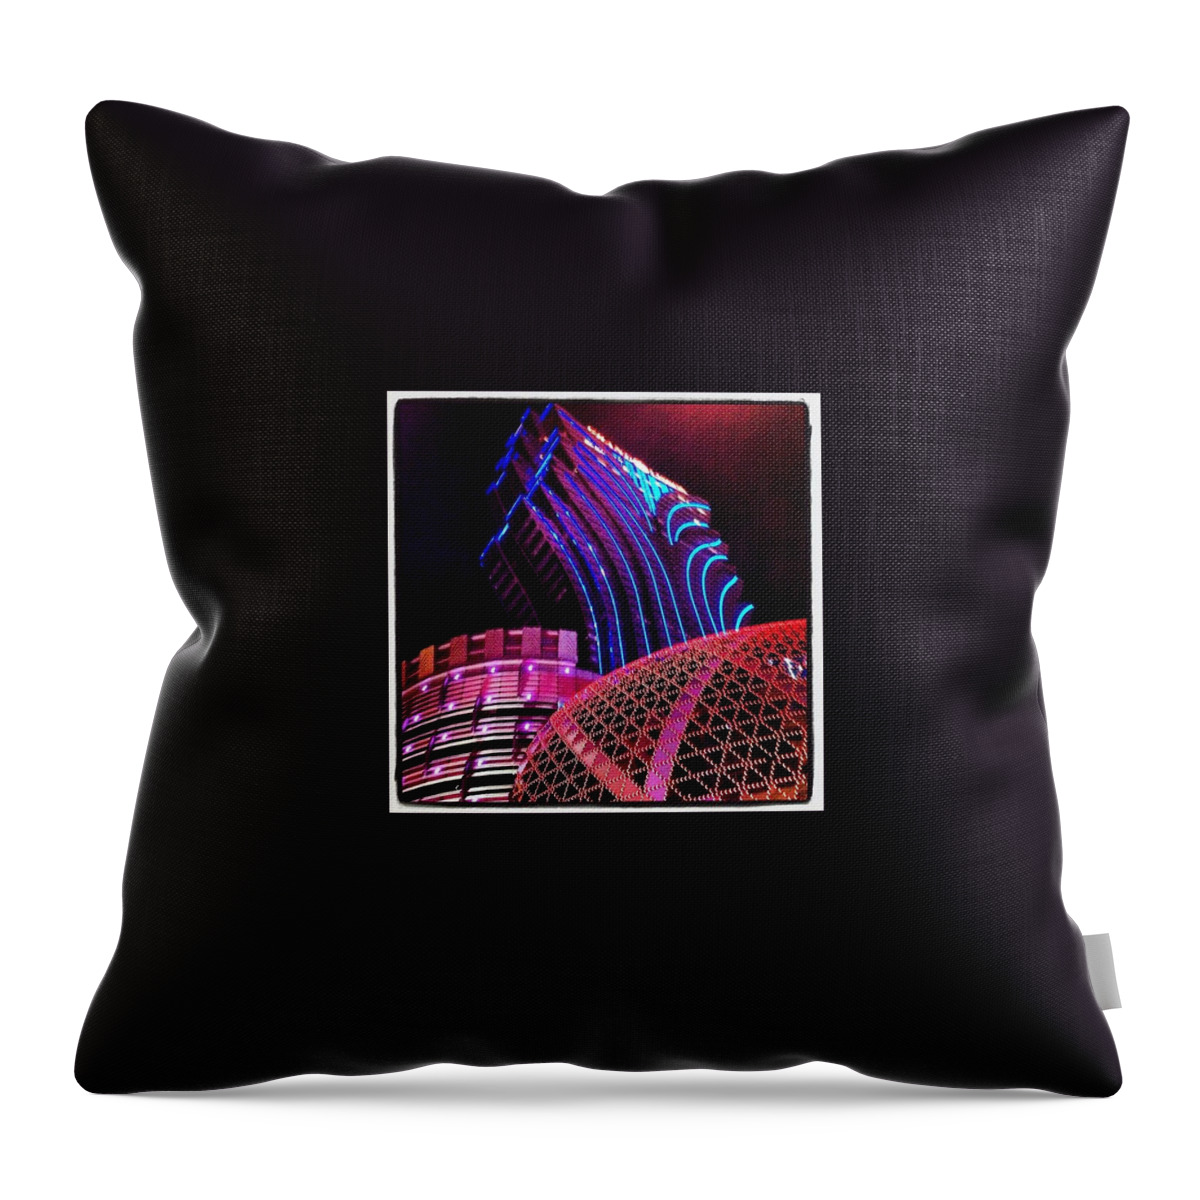 Grand Throw Pillow featuring the photograph Instagram Photo #1 by Chelsea Bulut